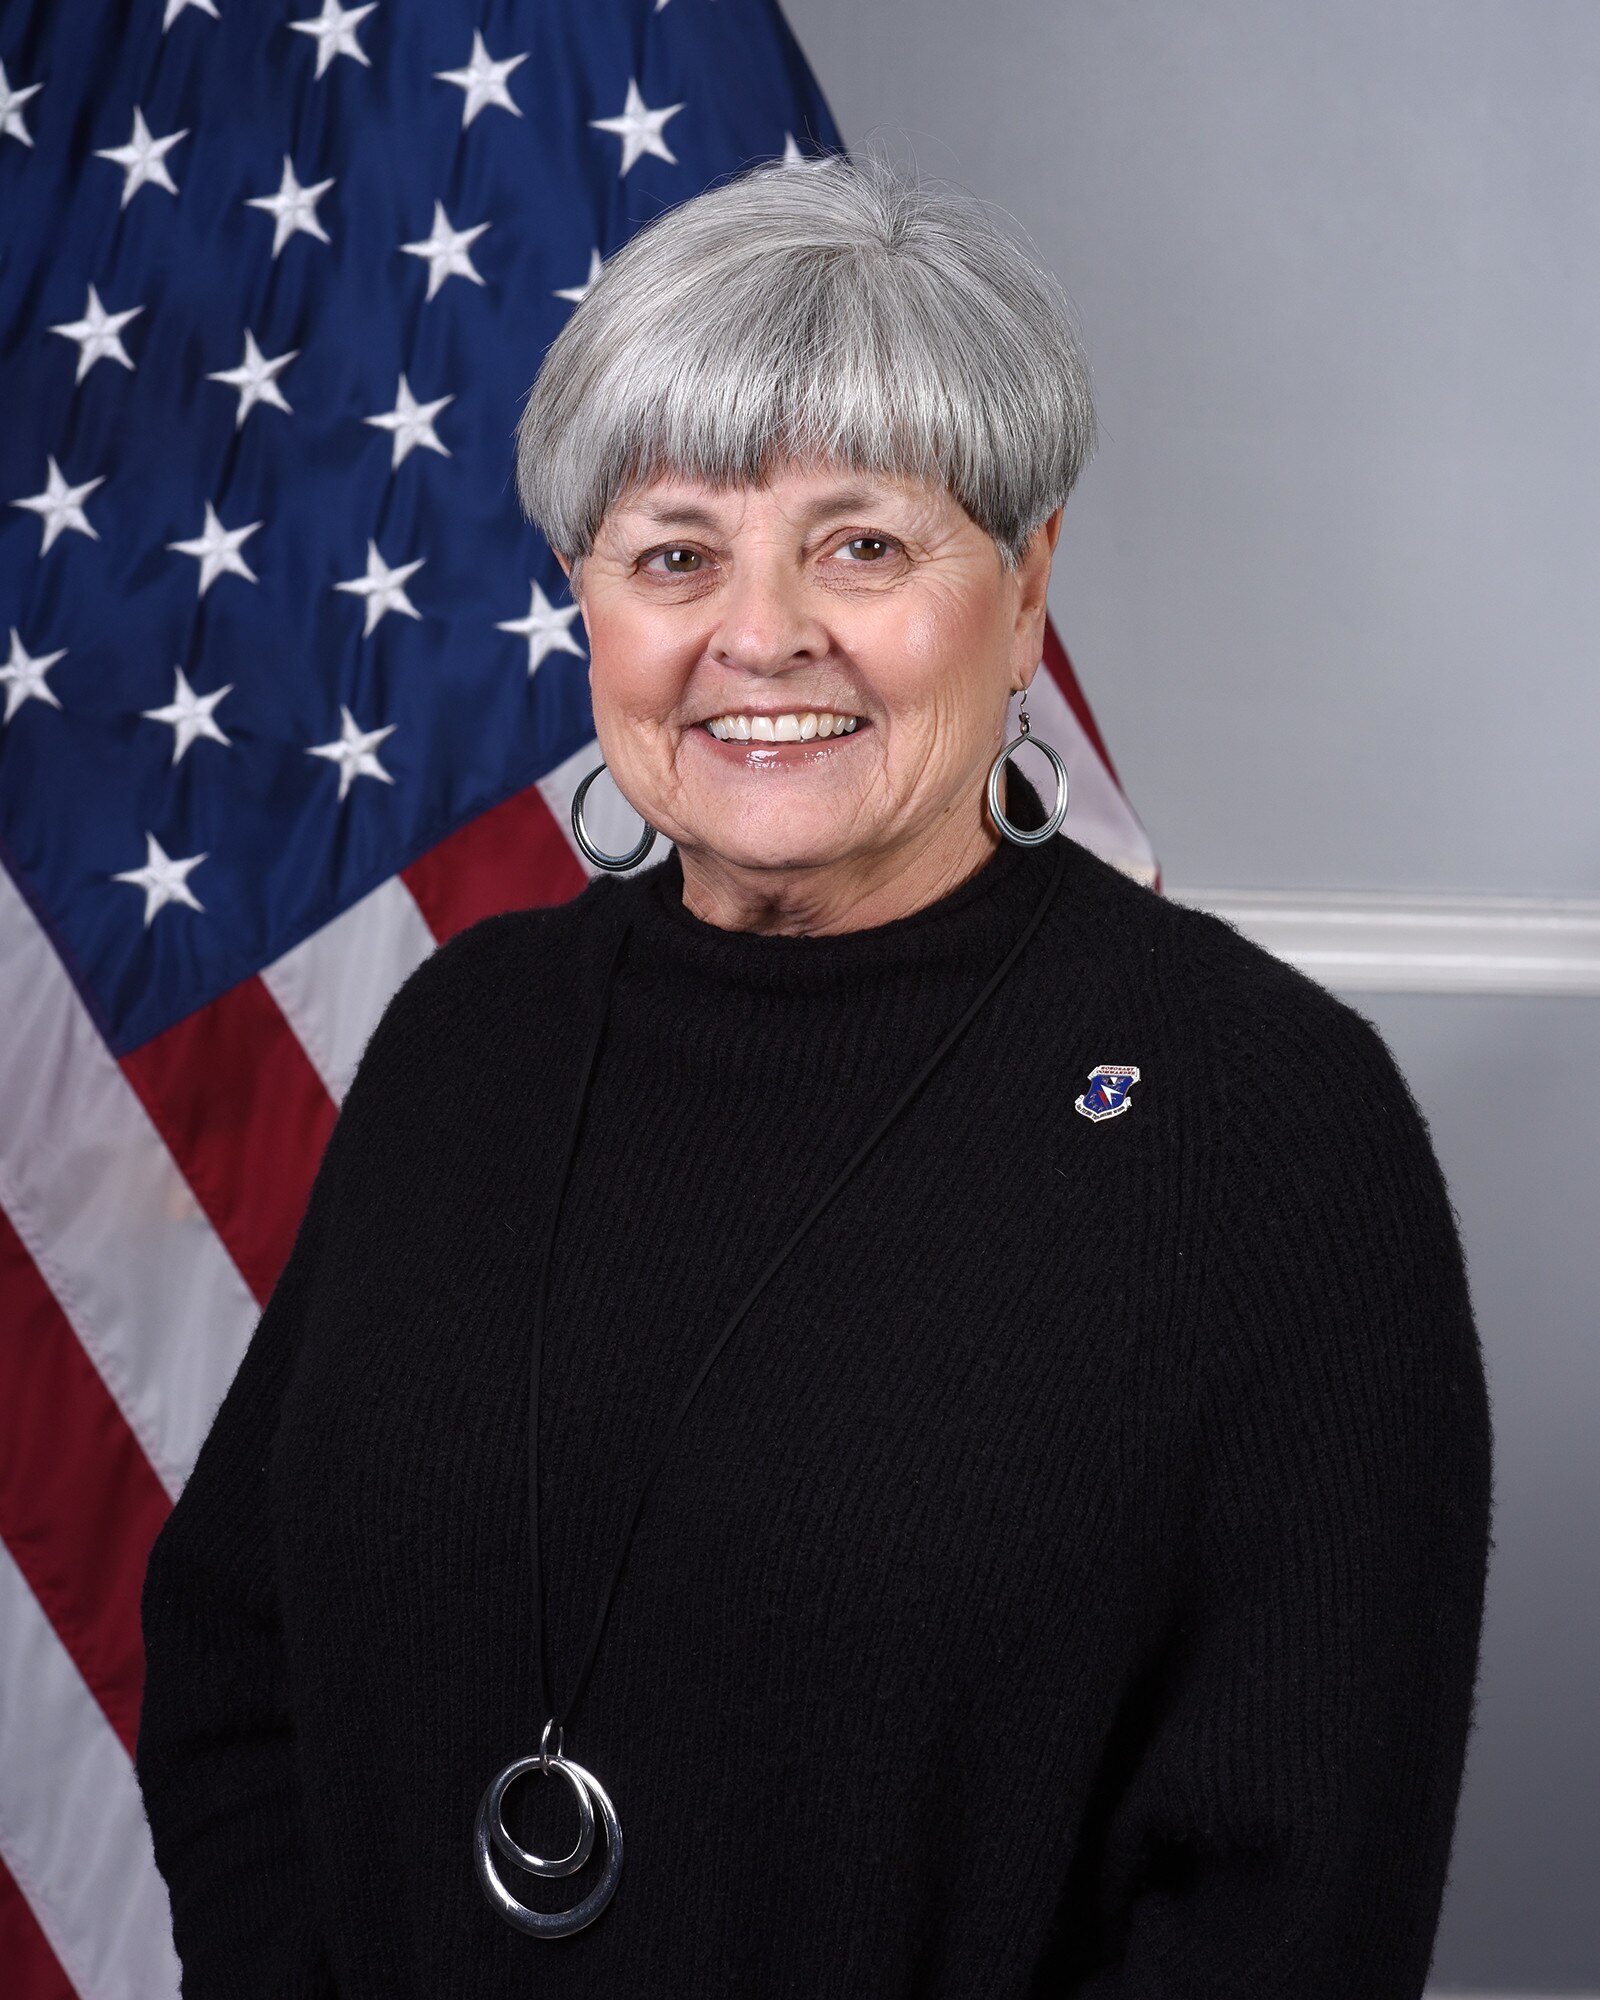 Barbara Bigelow, Main St. director in Columbus, Miss., poses for a photo. Bigelow was inducted into the Columbus Air Force Base Wingman Program in 2020 as Columbus AFB Wingman #35. (Courtesy photo)